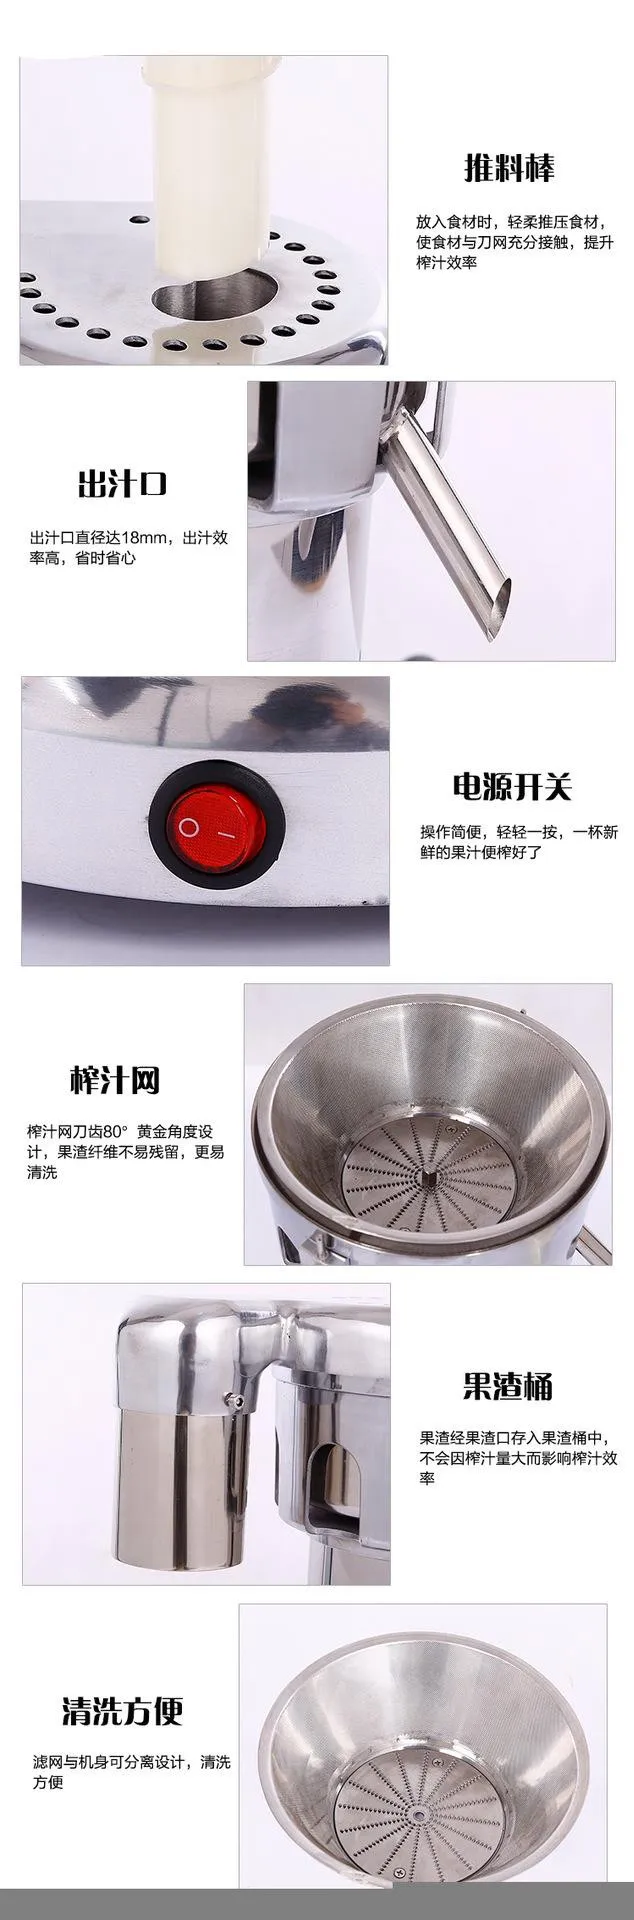 A6000 heavy duty commercial juicer,commercial juice extractor,aluminum body  and s/s blades bowl ,factory directly sale